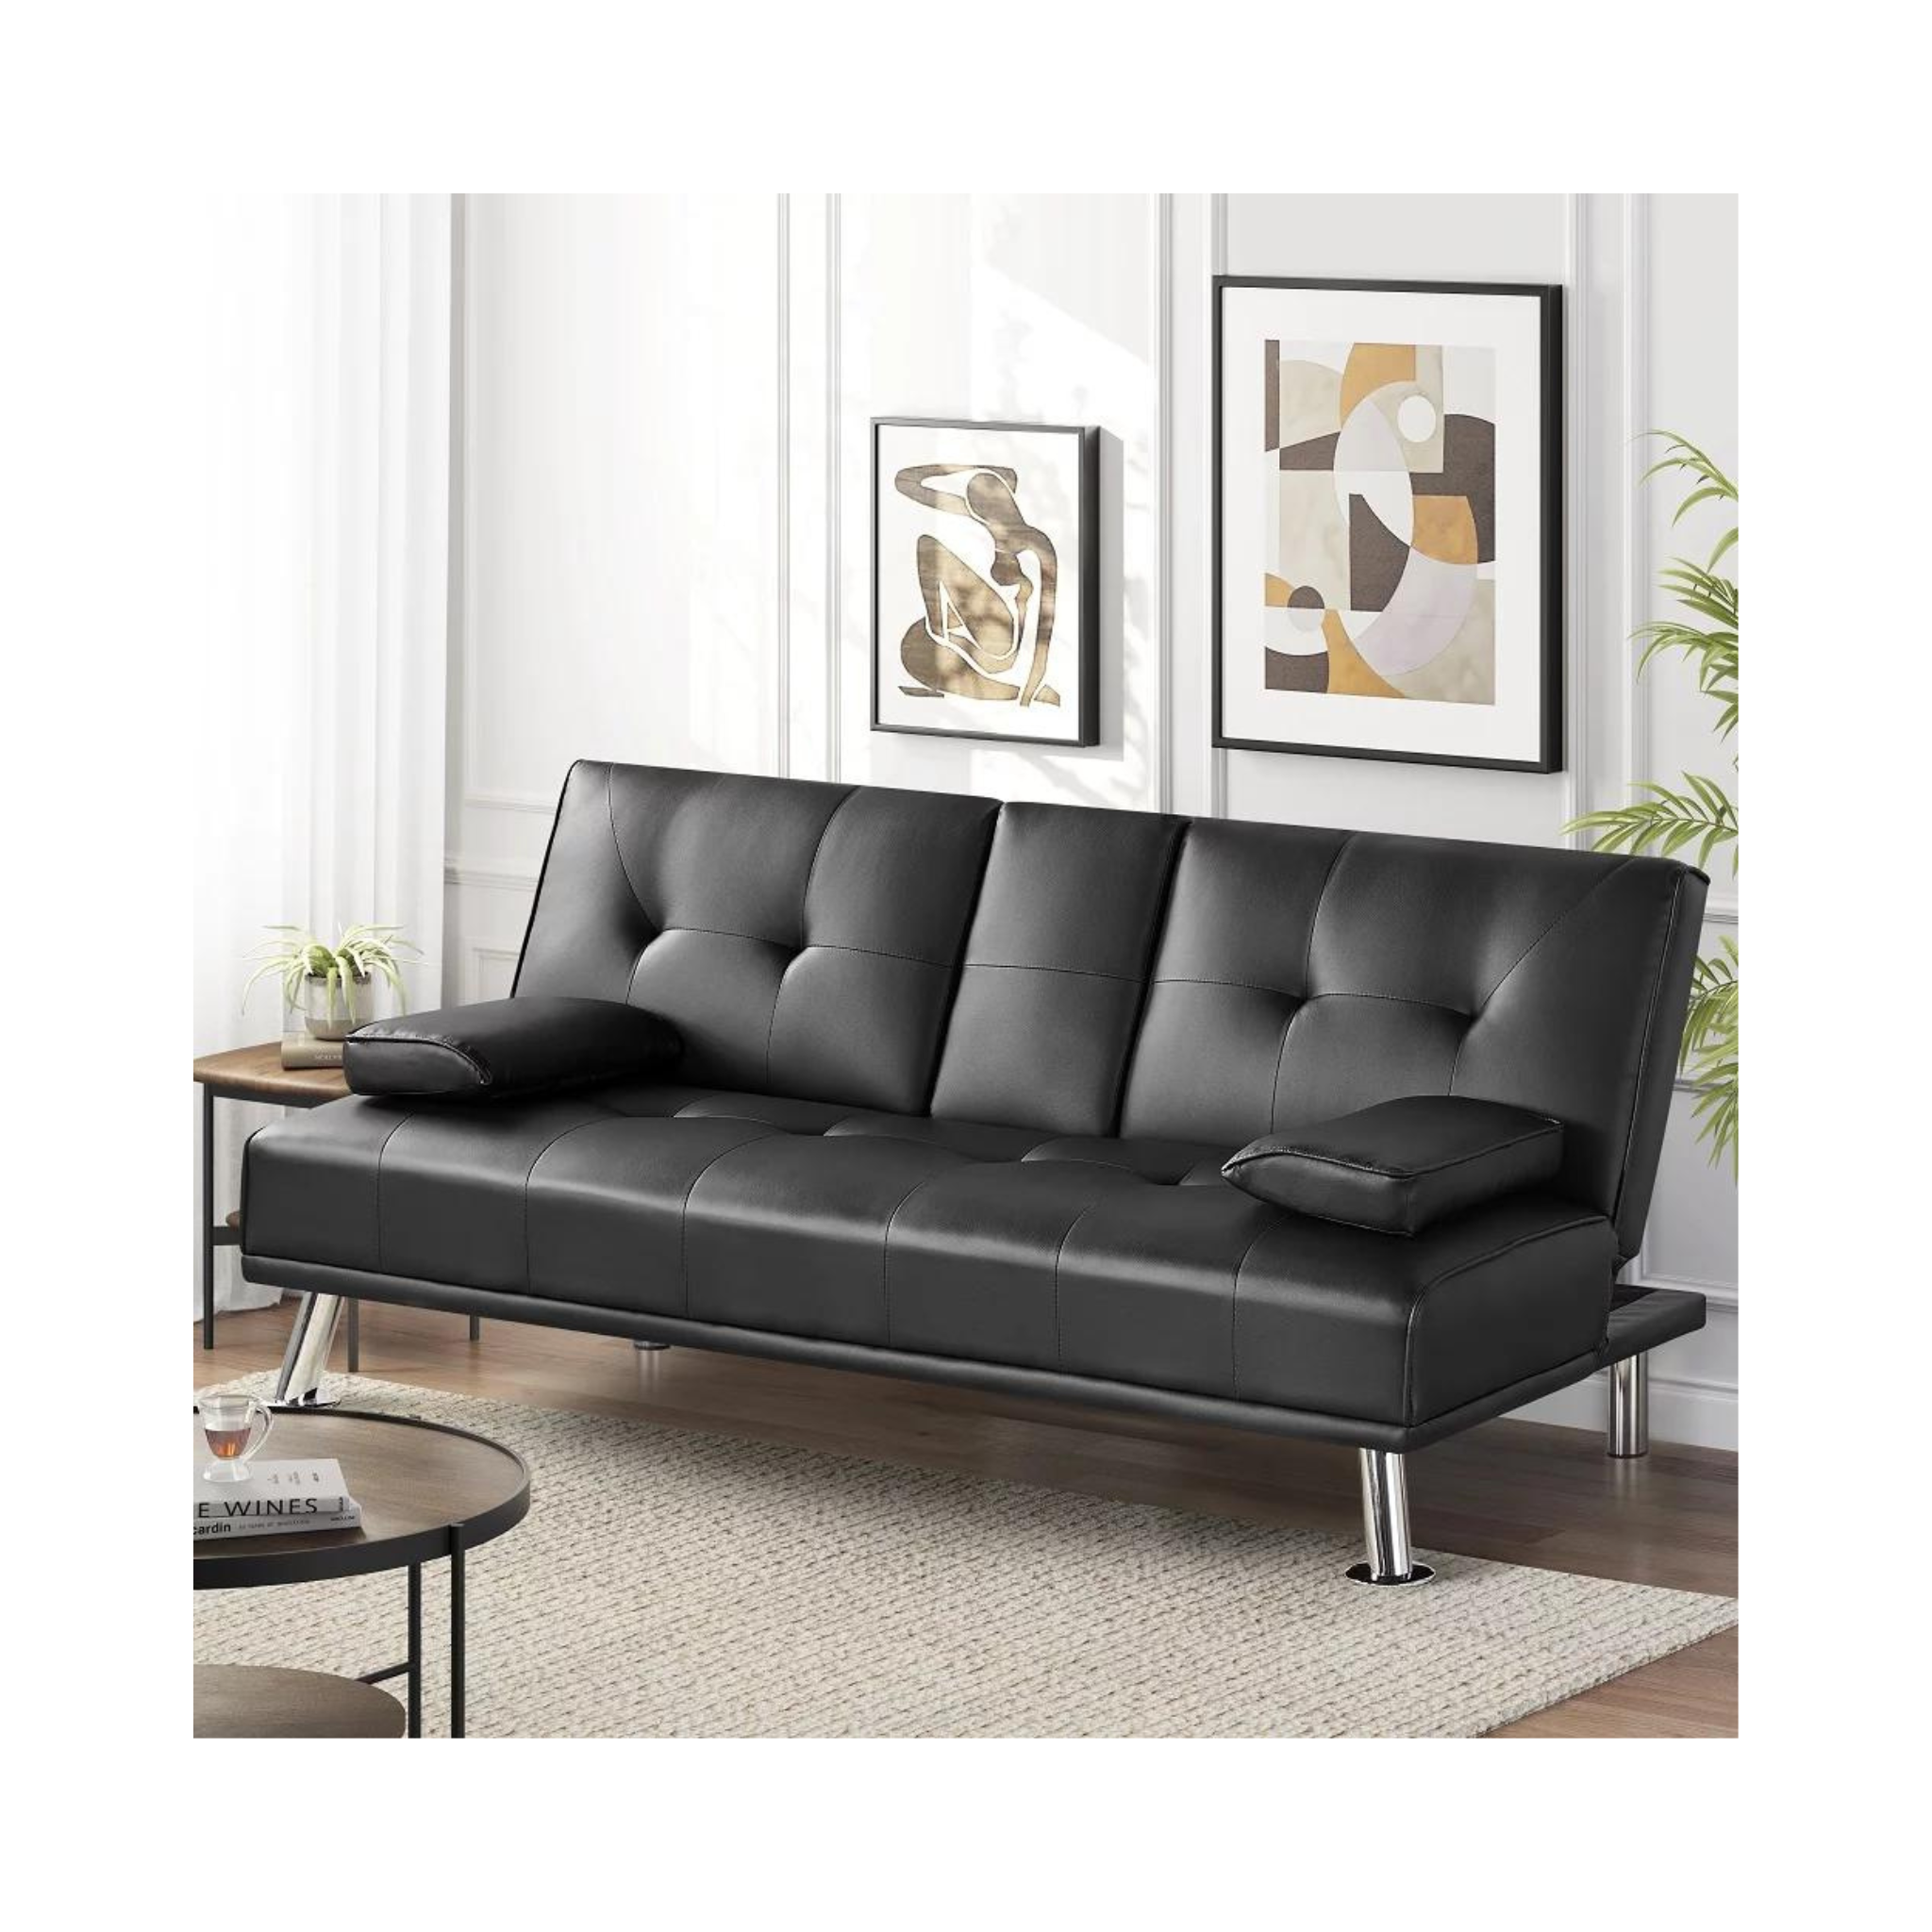 LuxuryGoods PU Leather Futon with Armrests & Cupholders